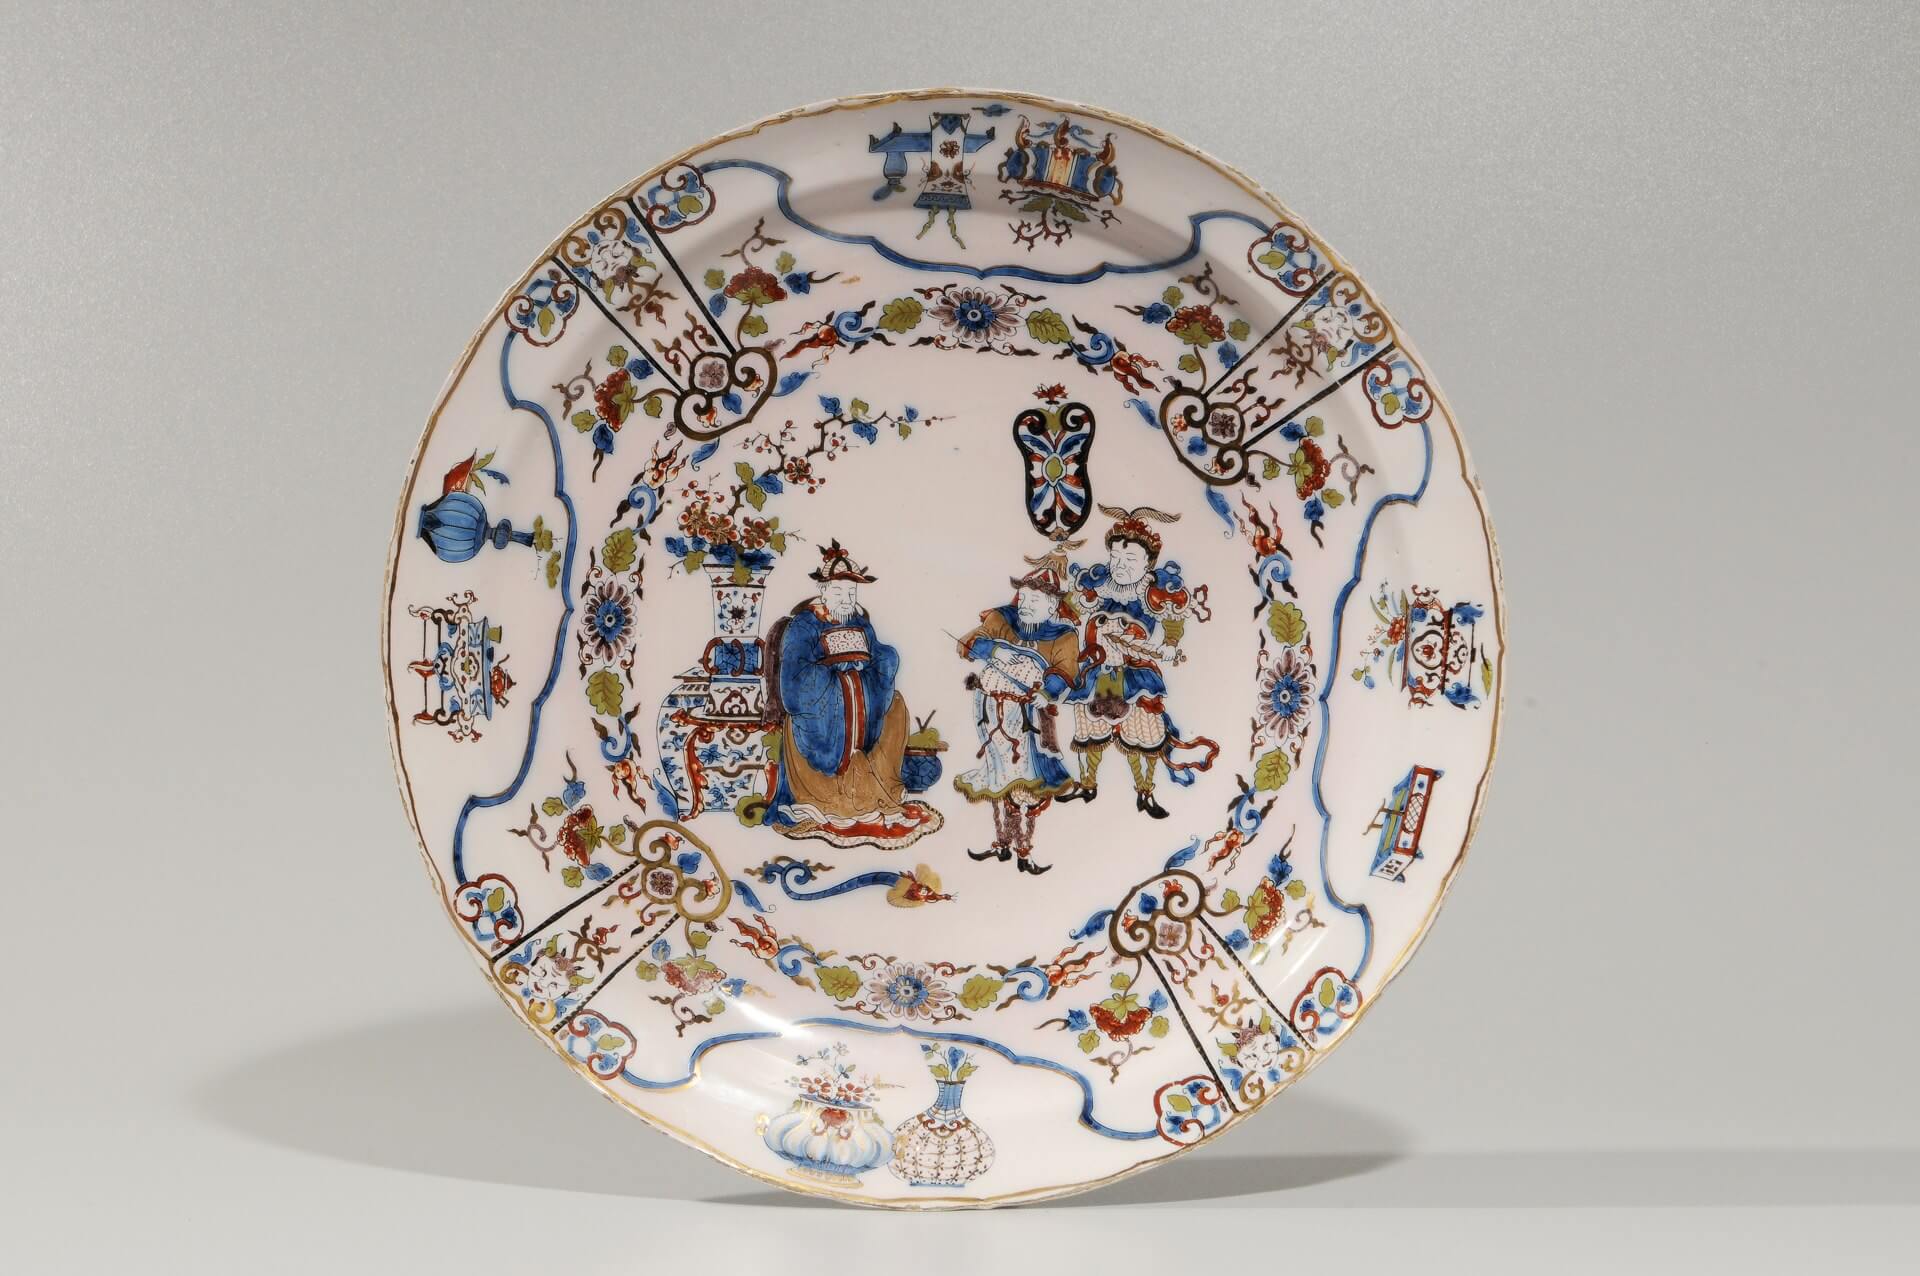 •D8813. Polychrome and gilded chinoiserie charger